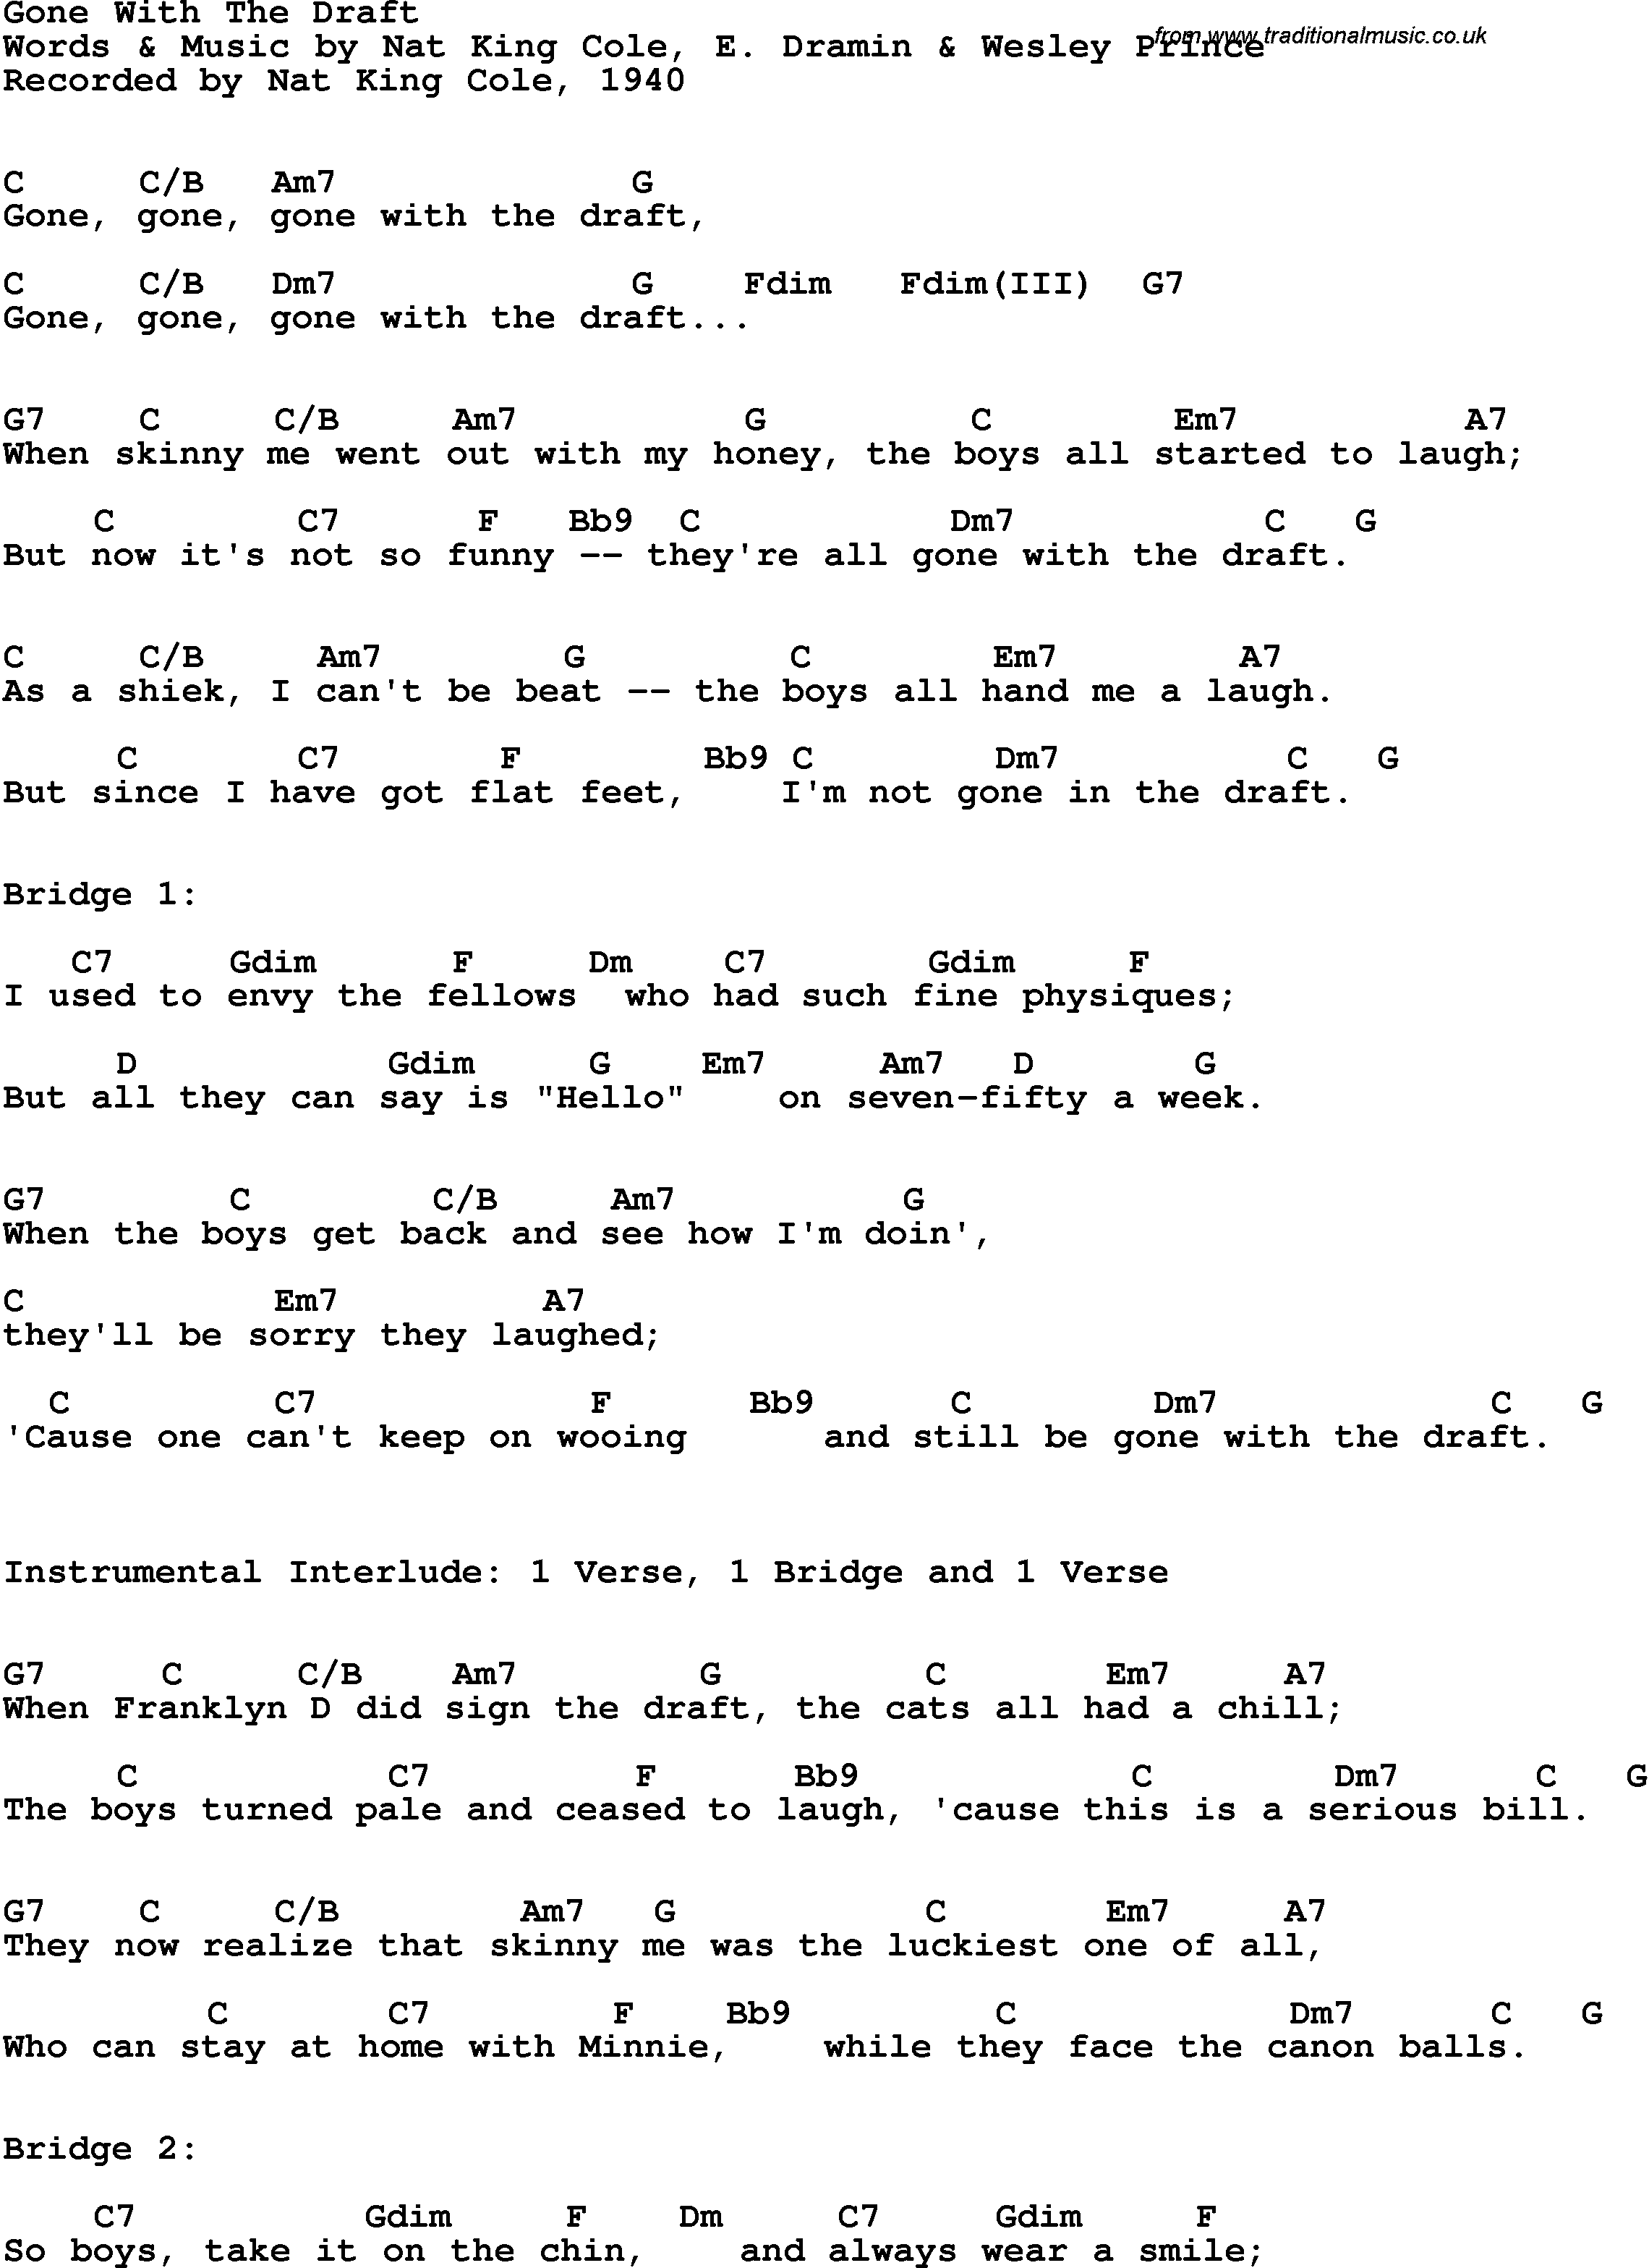 Song Lyrics with guitar chords for Gone With The Draft - Nat King Cole, 1940